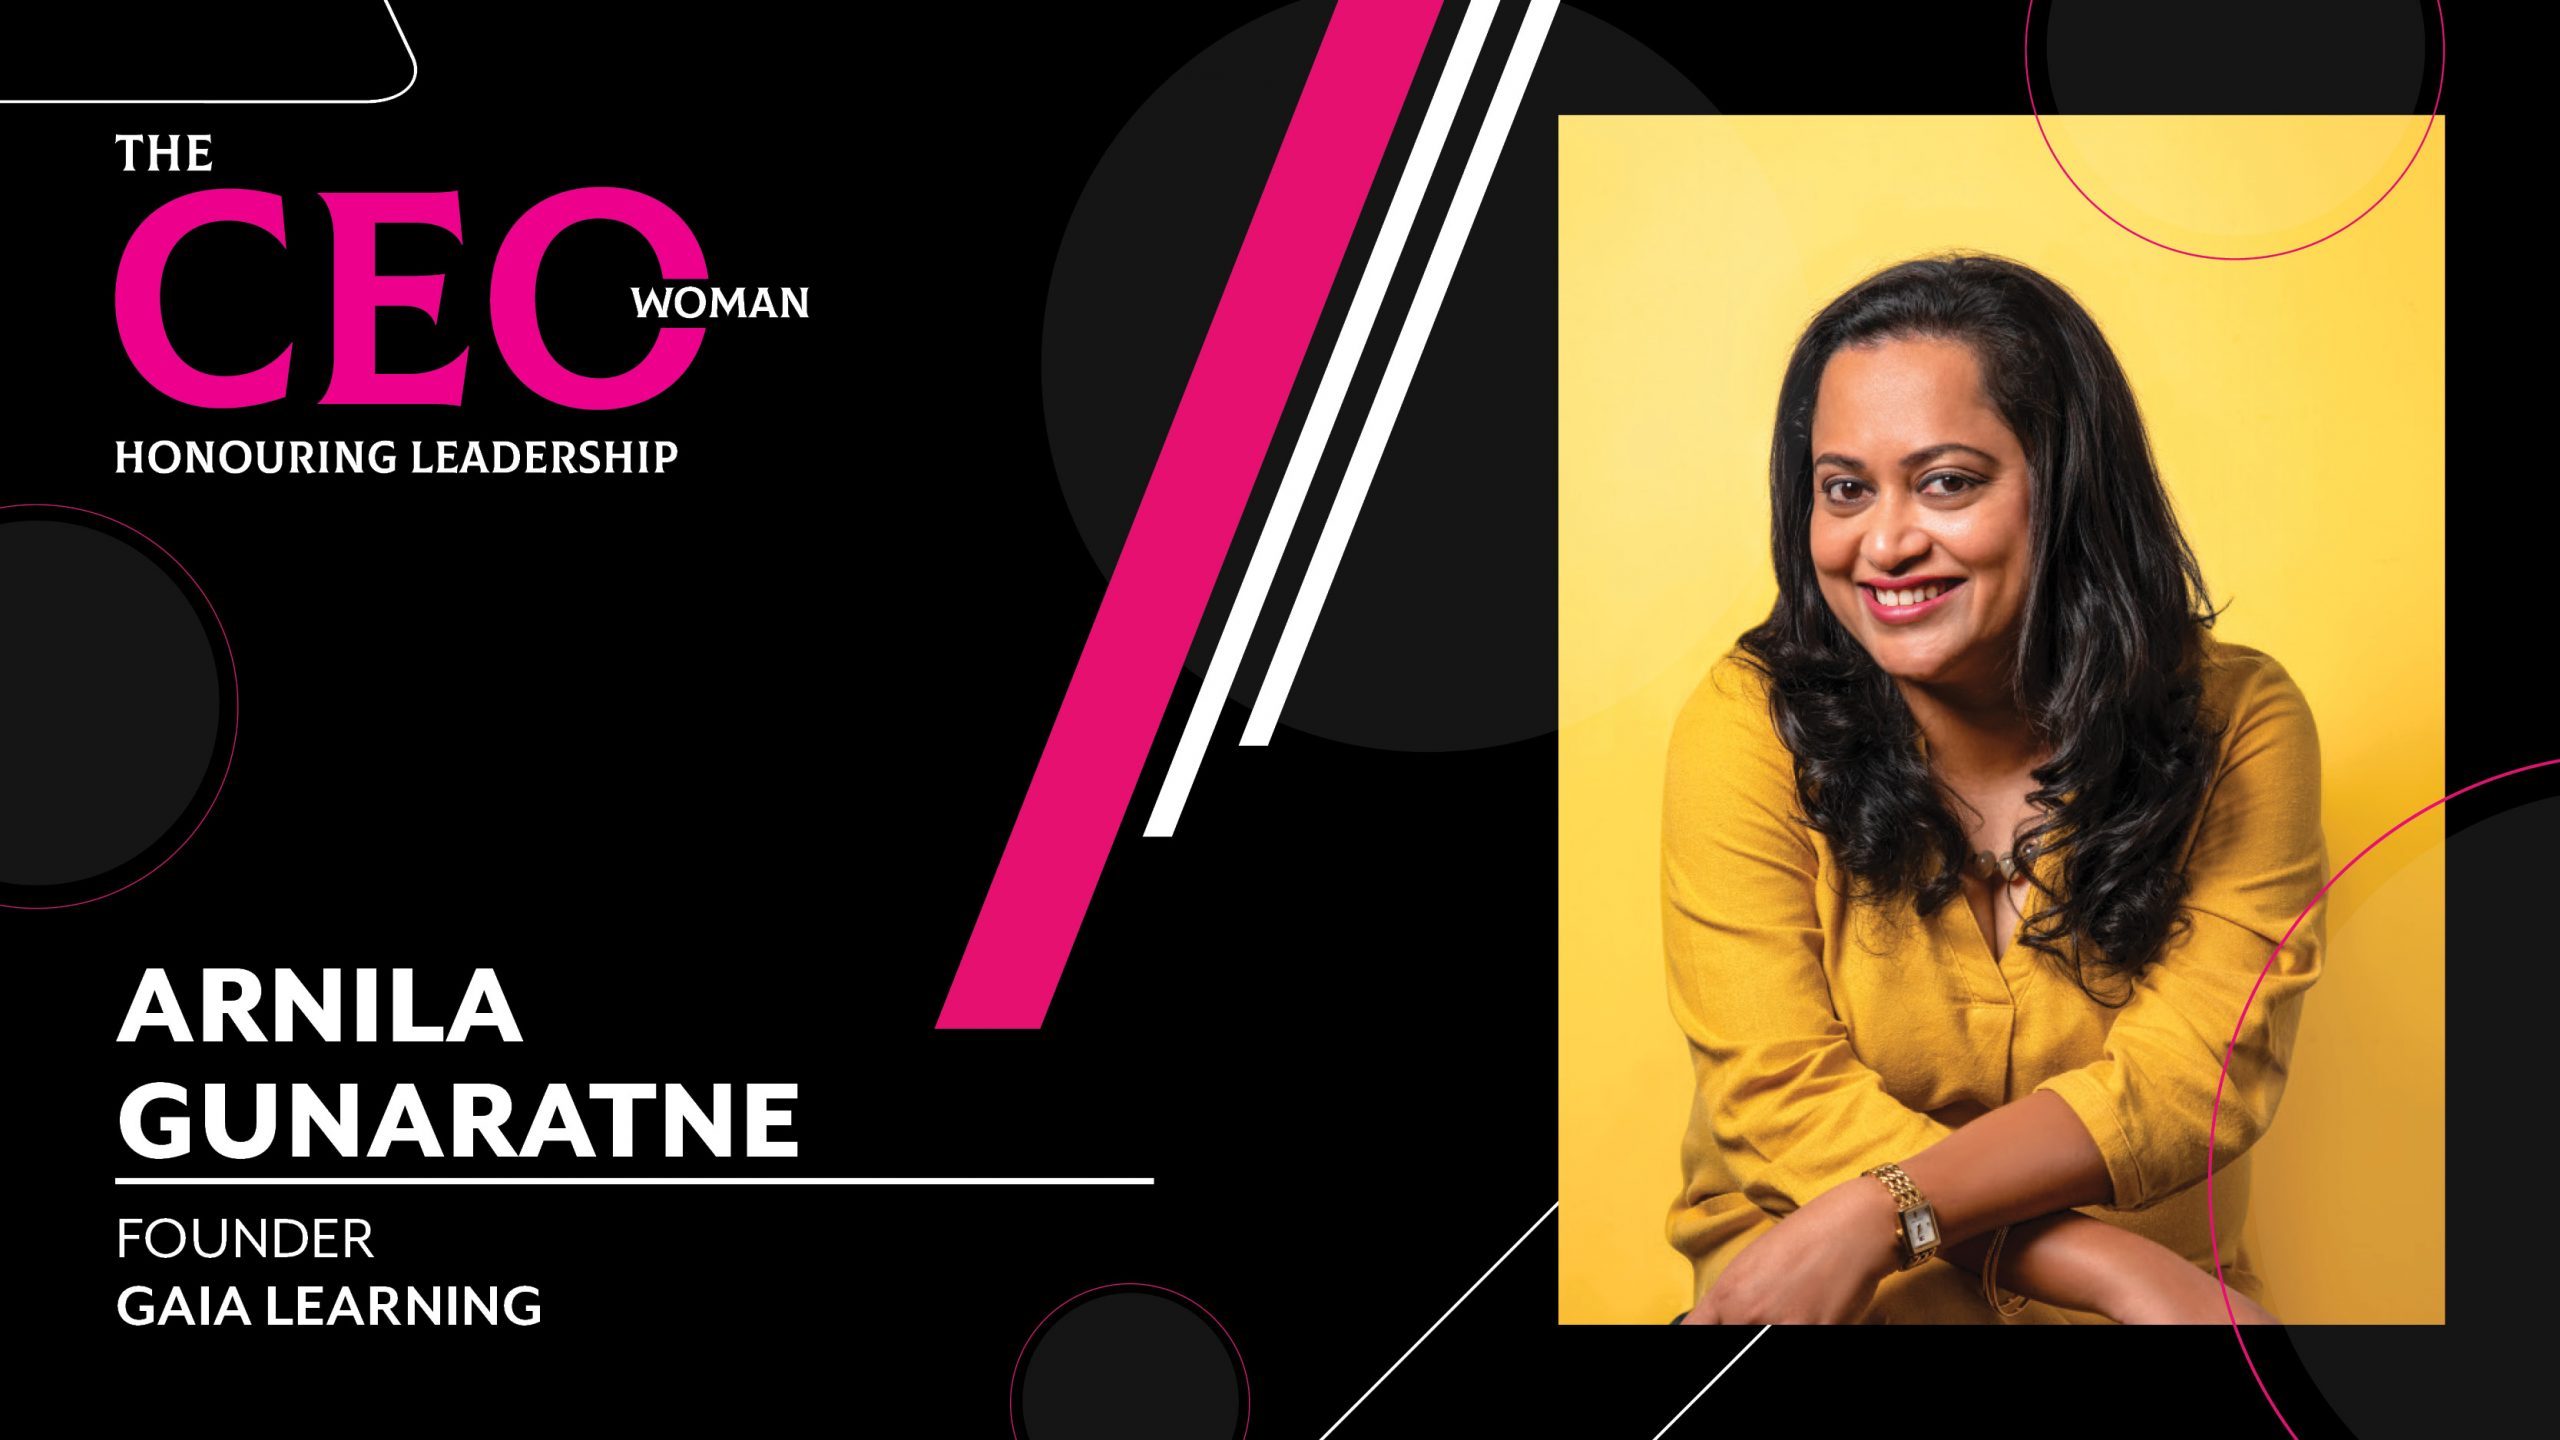 Training the Workforce to make Organizations become Globally Competitive – the Founder of Gaia Learning, Arnila Gunaratne